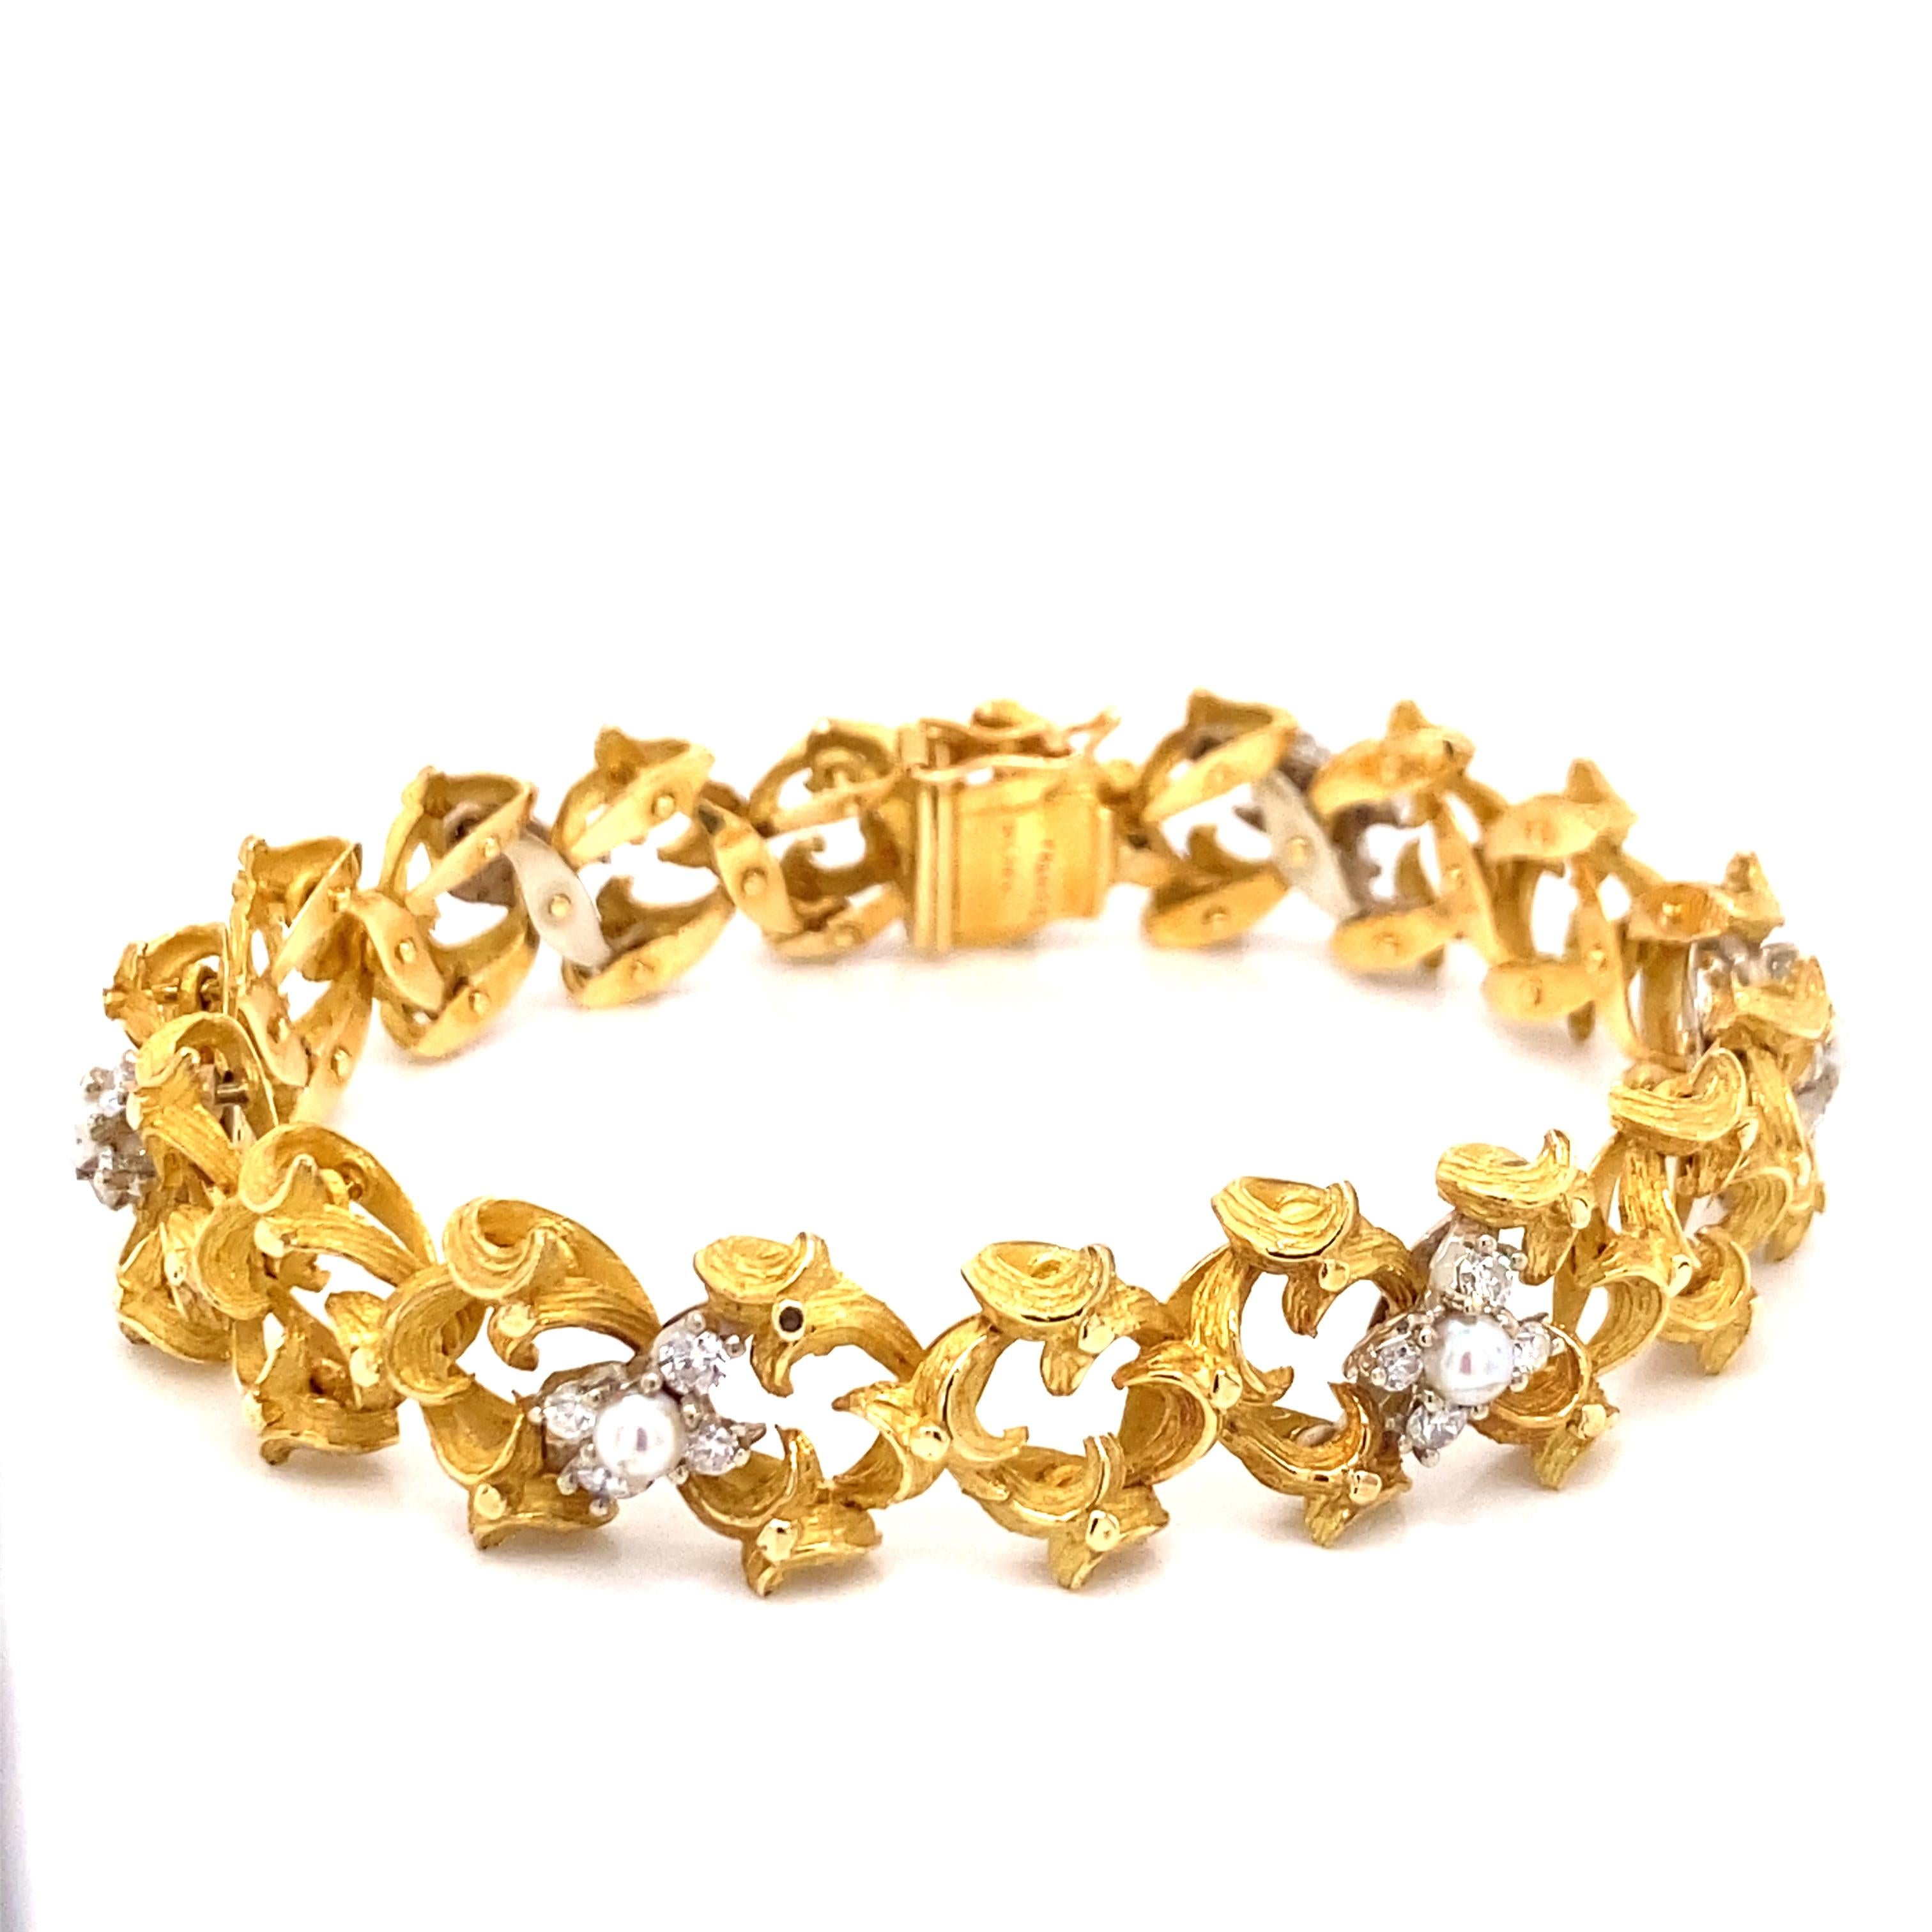 Vintage 18K Yellow Gold French Hand Made Link Bracelet with Diamonds and Pearls - The hand made bracelet contains 6 white gold links with 4 round diamonds in each link with a 3mm pearl in the center. The total diamond weight is approximately .72ct